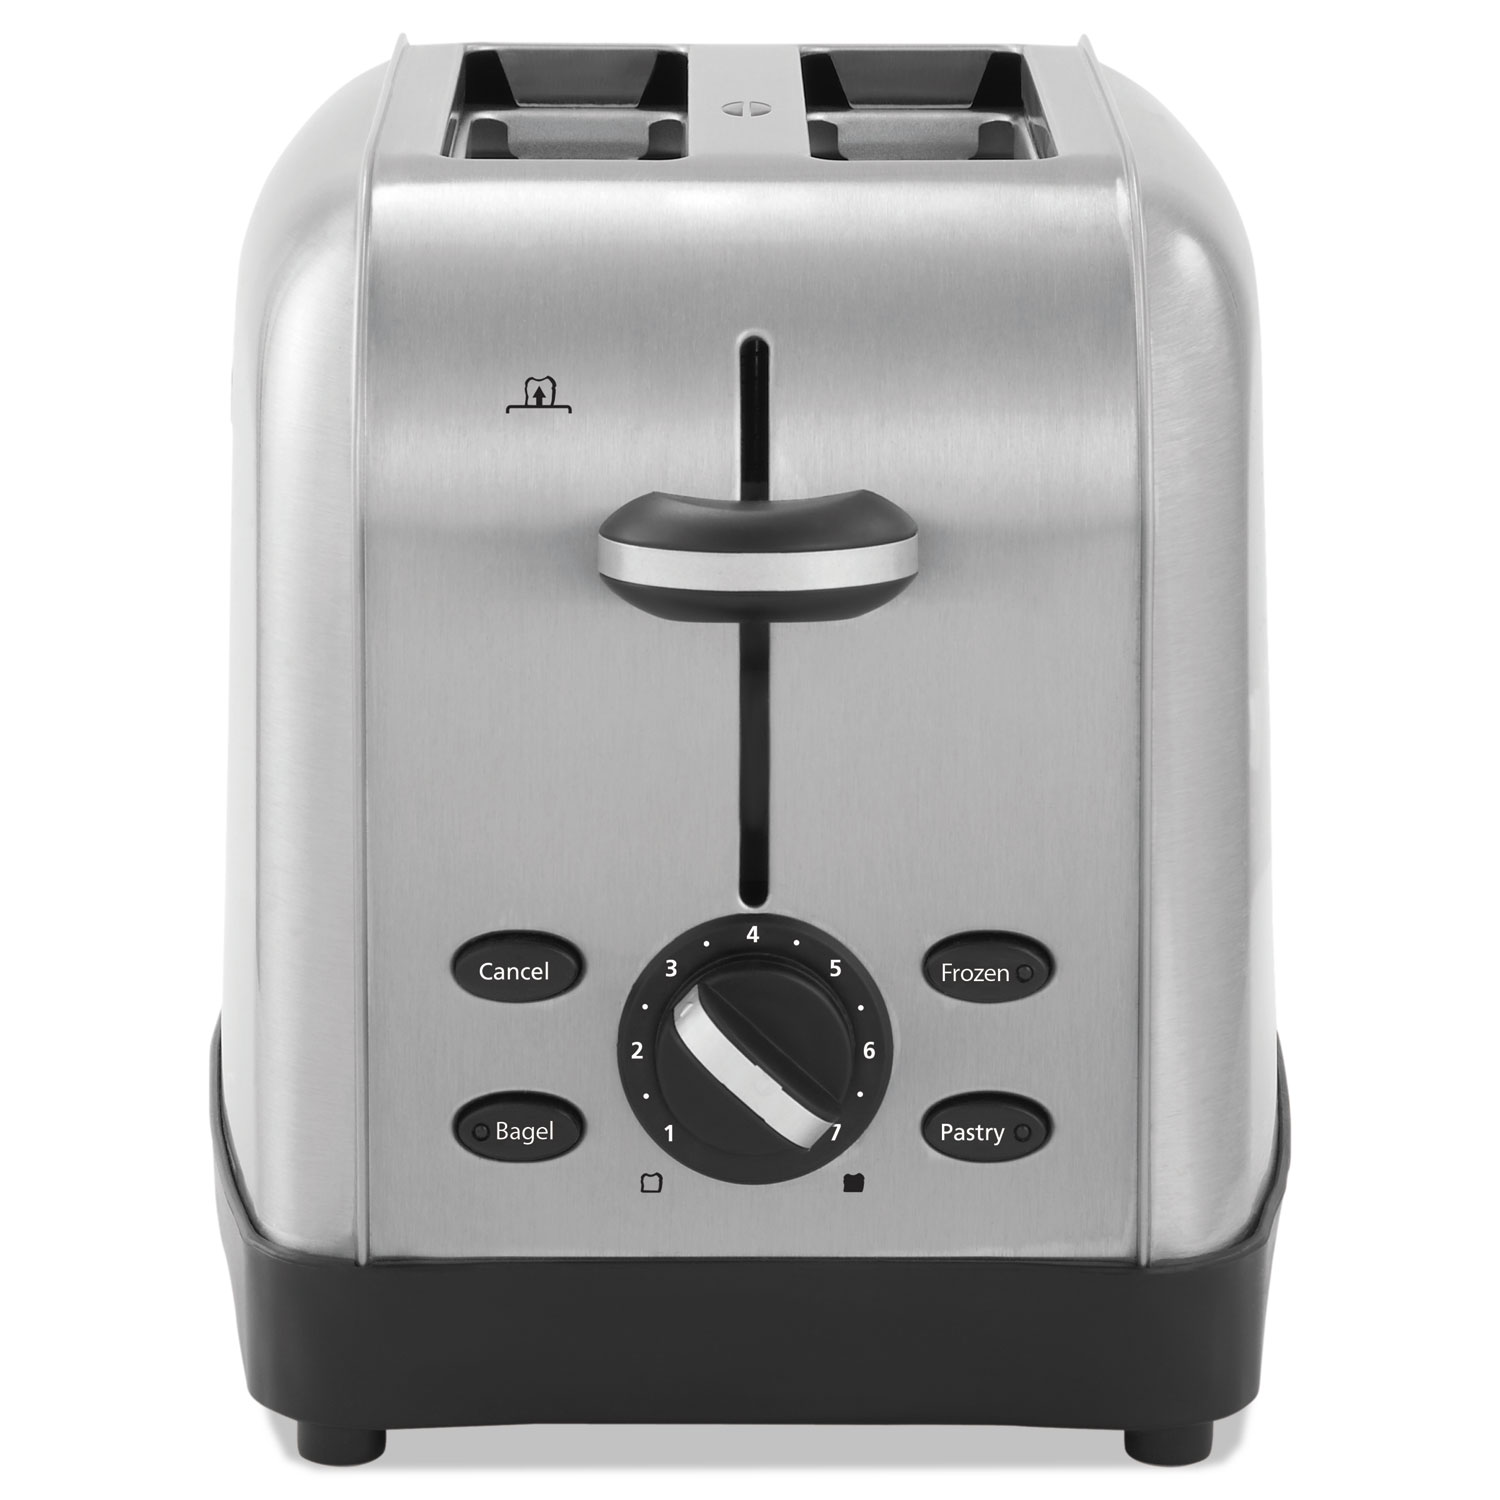  Oster TSSTTRWF2S001 Extra Wide Slot Toaster, 2-Slice, 8 x 12 7/8 x 8 1/2, Stainless Steel (OSRRWF2S) 